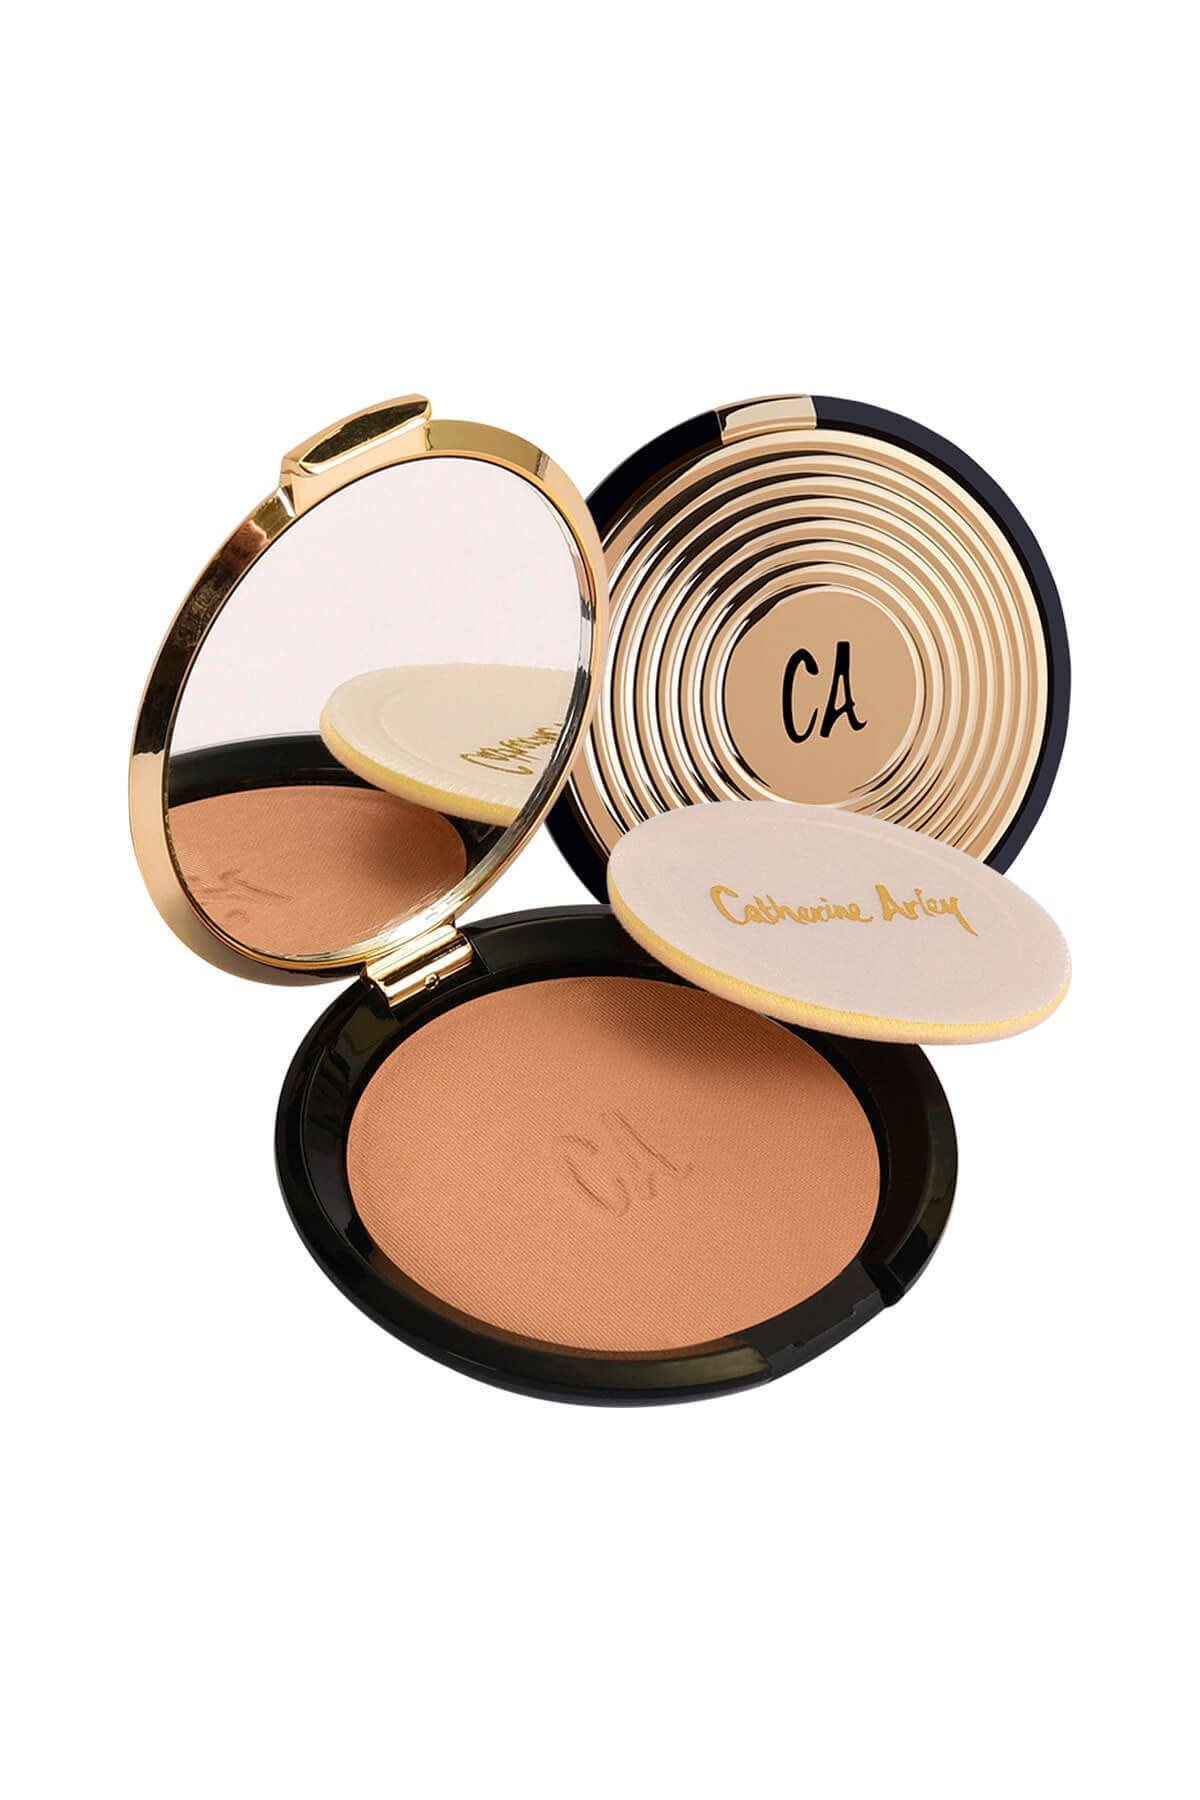 Catherine Arley Gold Pudra - Gold Compact Powder 105 8691167474869